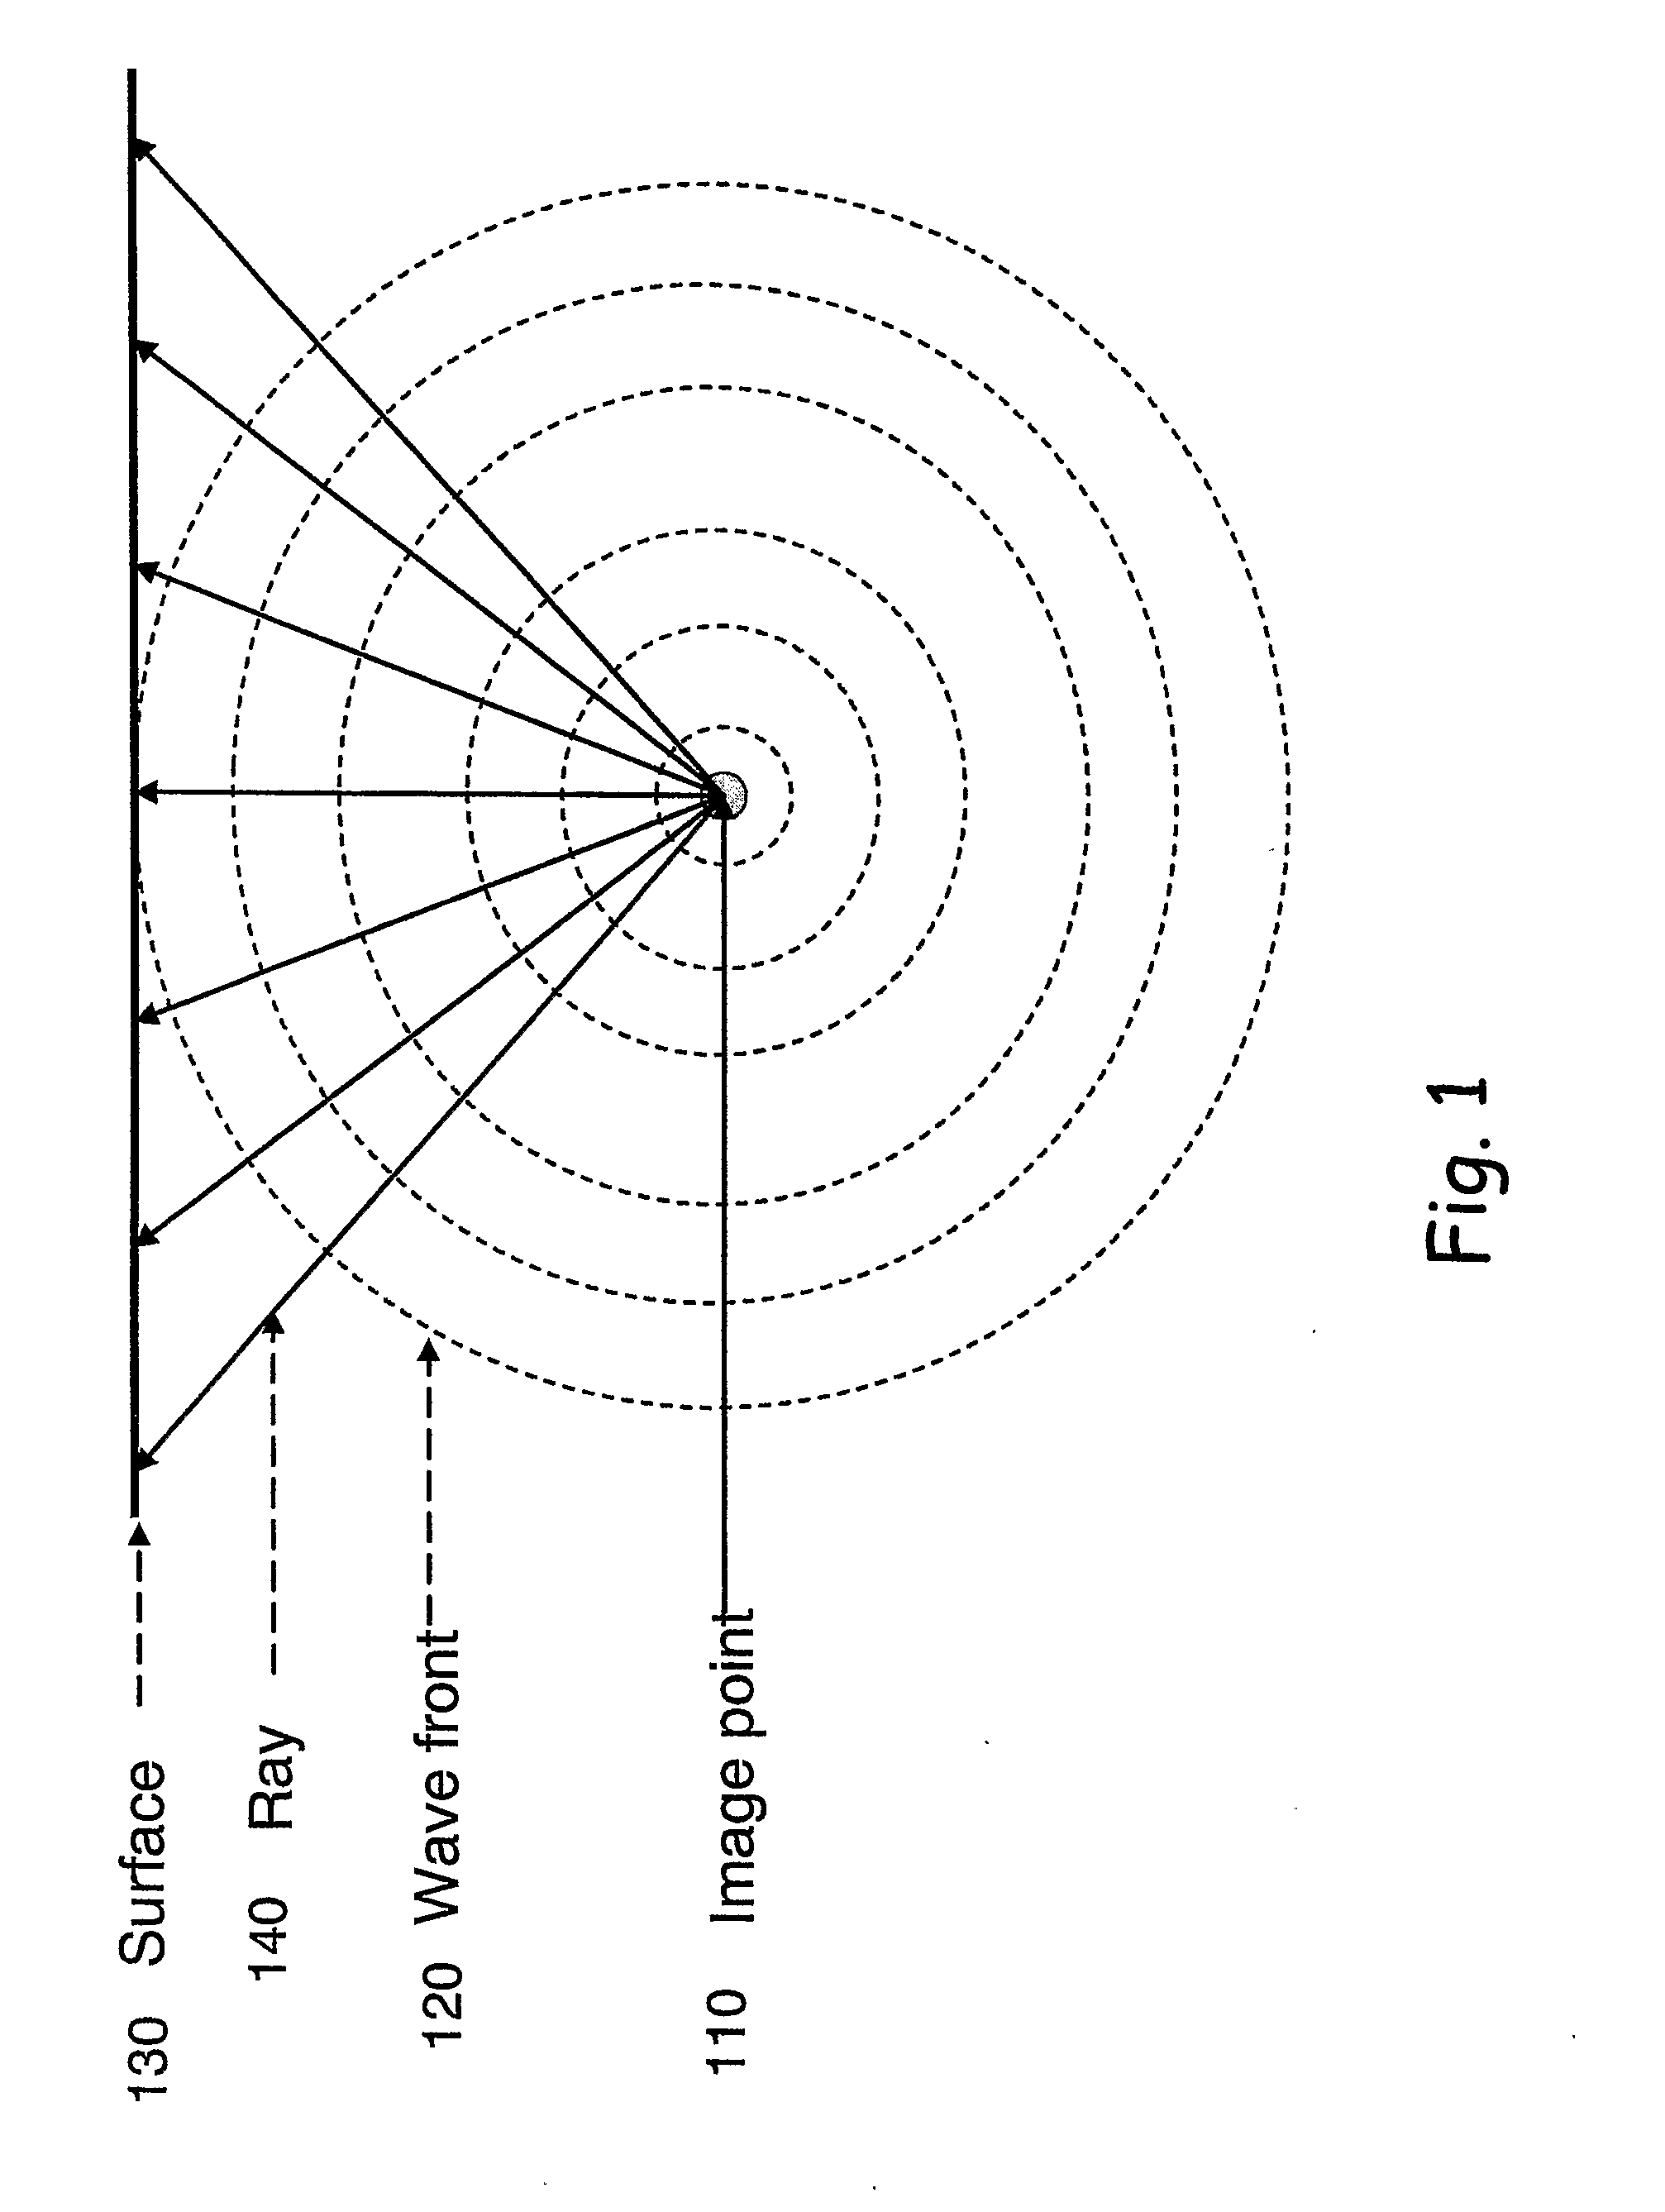 Method for identifying and analyzing faults/fractures using reflected and diffracted waves